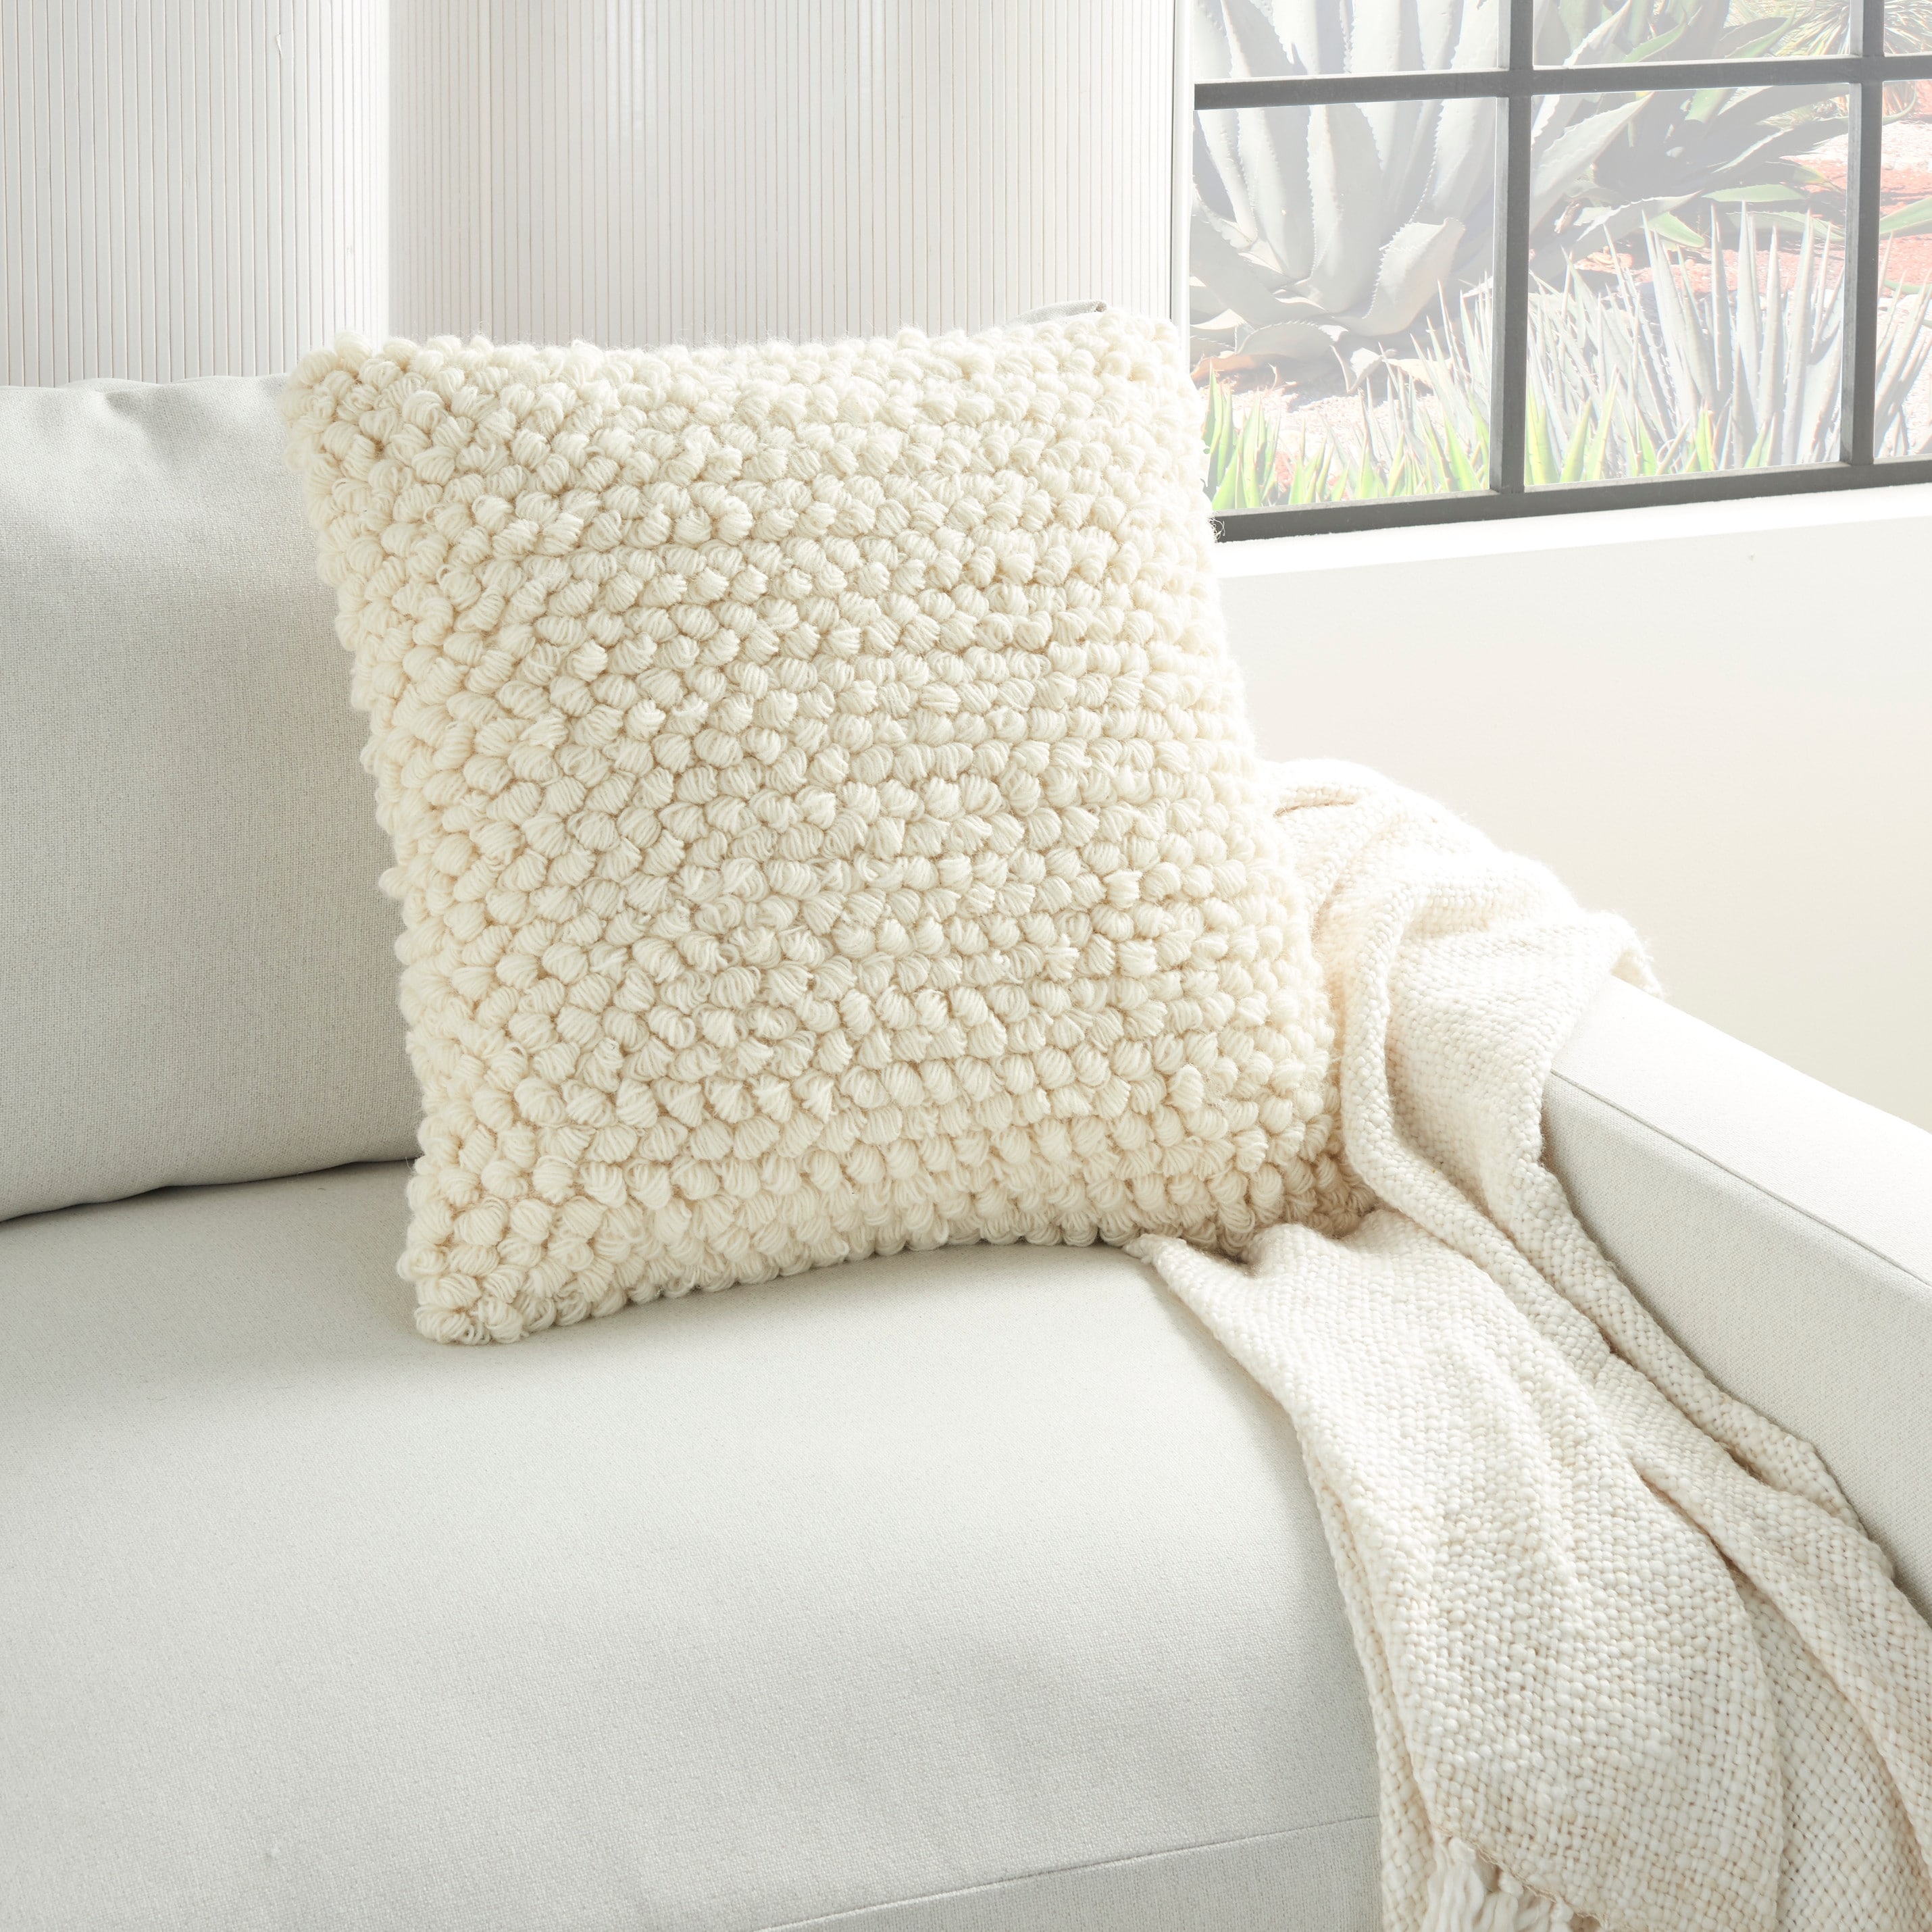 https://ak1.ostkcdn.com/images/products/is/images/direct/48114a097a40b533e97e31ce6fb2e6c5bd2d2fc5/The-Curated-Nomad-Cantera-Loops-Ivory-Throw-Pillow-%2820-inch-x-20-inch%29.jpg